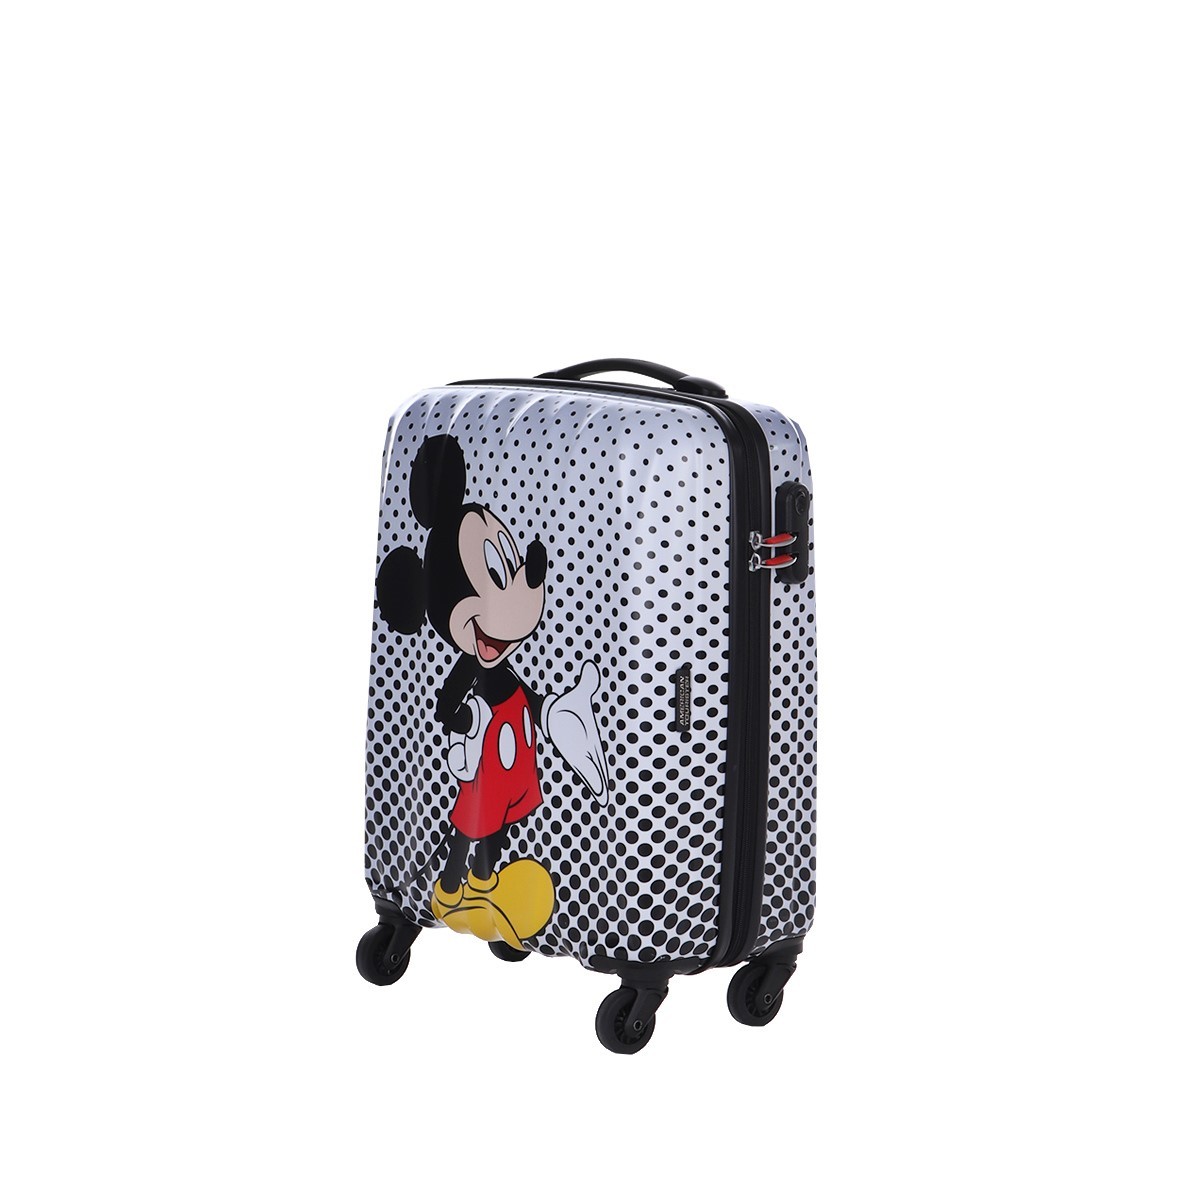 American tourister by samsonite Spinner cabina 4 ruote Mickey mouse polka dot Disney legends 19C*15019